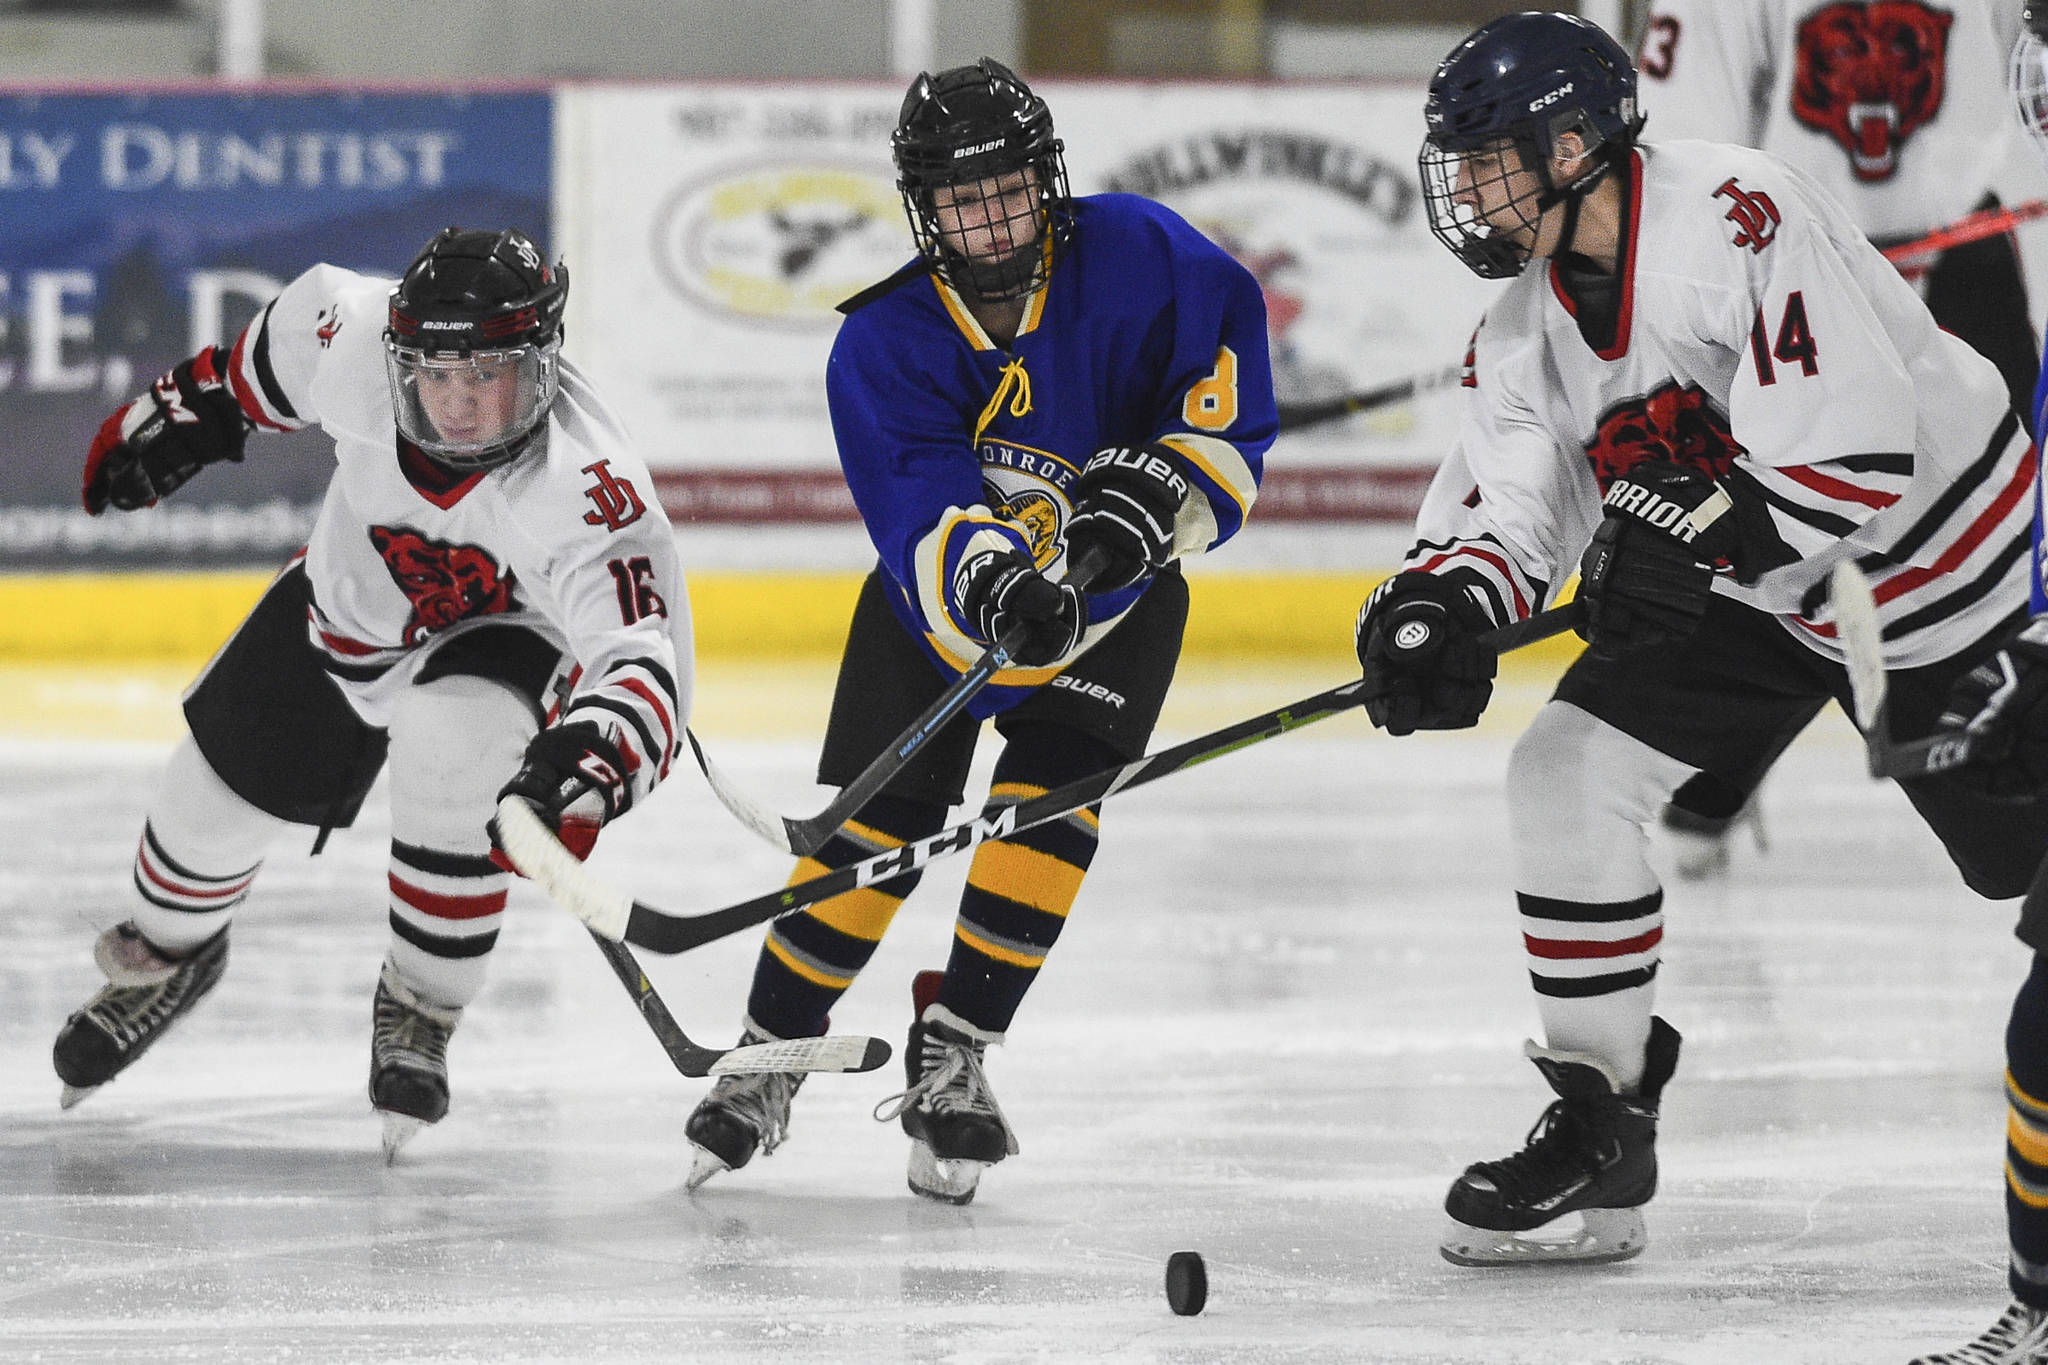 Juneau-Douglas’ Zac Stagg, left, and Max McHenry, right, take the puck away from Monroe Catholic’s Bella Knavel at the Treadwell Arena on Friday, Nov. 15, 2019. JDHS won 10-0. (Michael Penn | Juneau Empire)